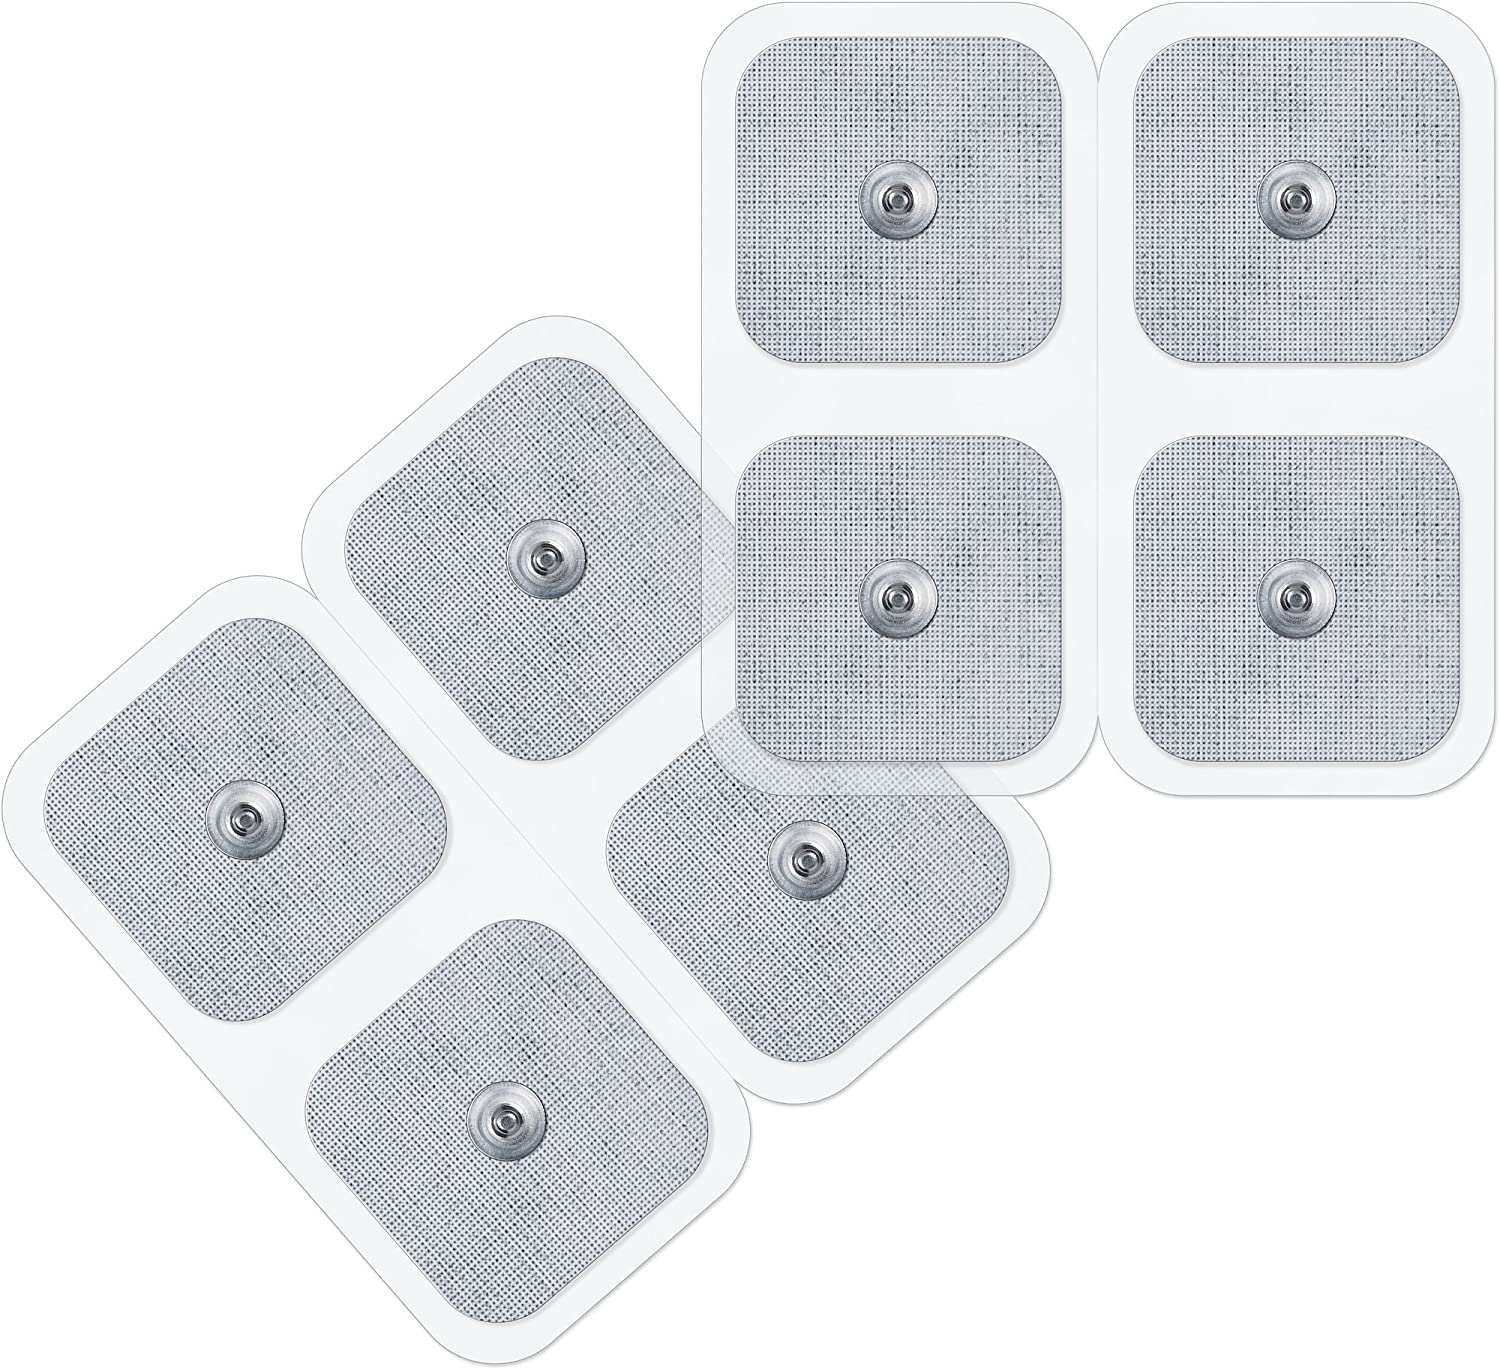 Beurer & Sanitas Electrode Replacement Kit Consisting of 8 Self-Adhesive Gel Pads 45 x 45 mm Suitable for EMS and TENS Devices from Beurer and Sanitas